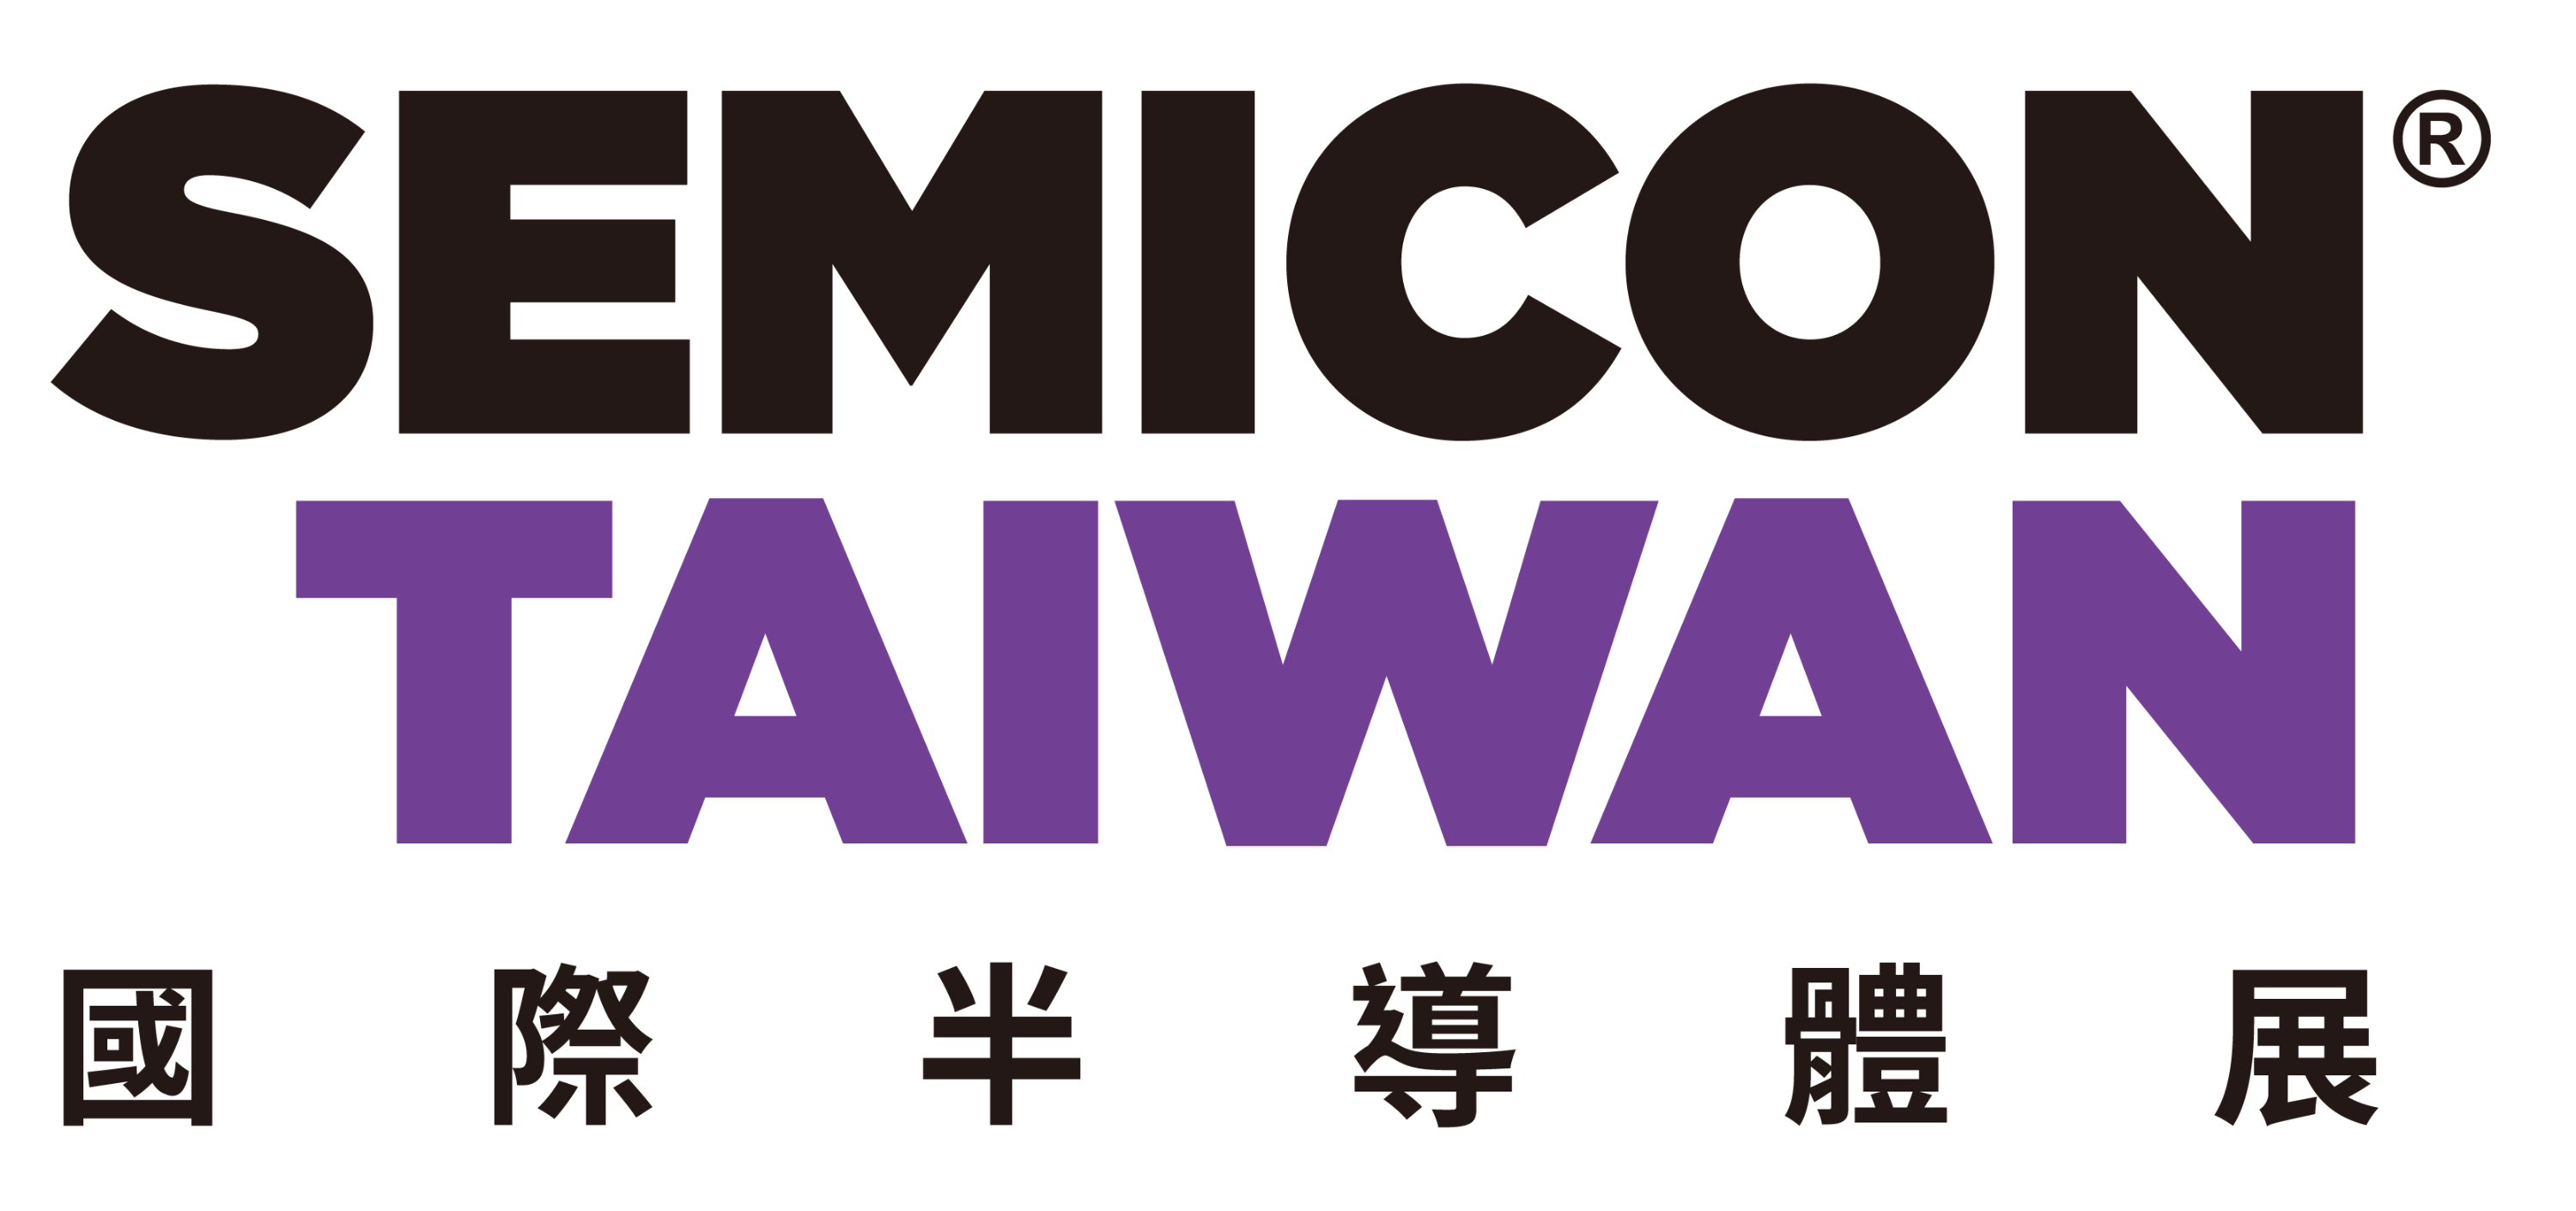 🌟 Microcosm Technology to Participate in Semicon Taiwan 2023🌟